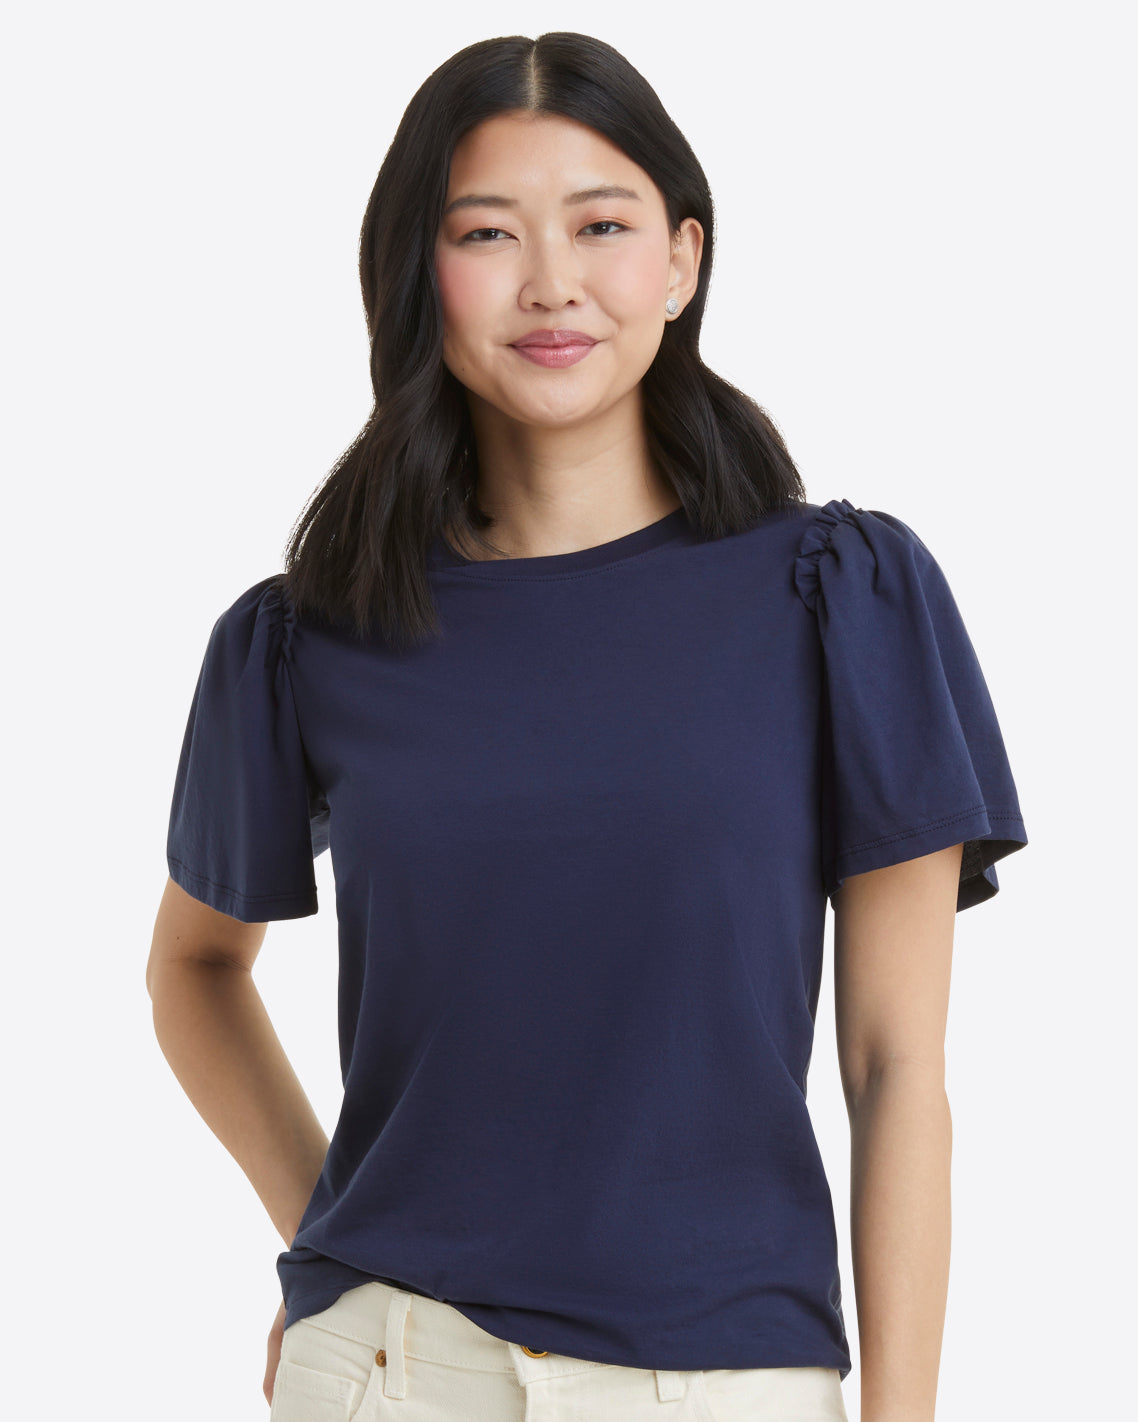 Short Sleeve Easy Knit Top in Navy